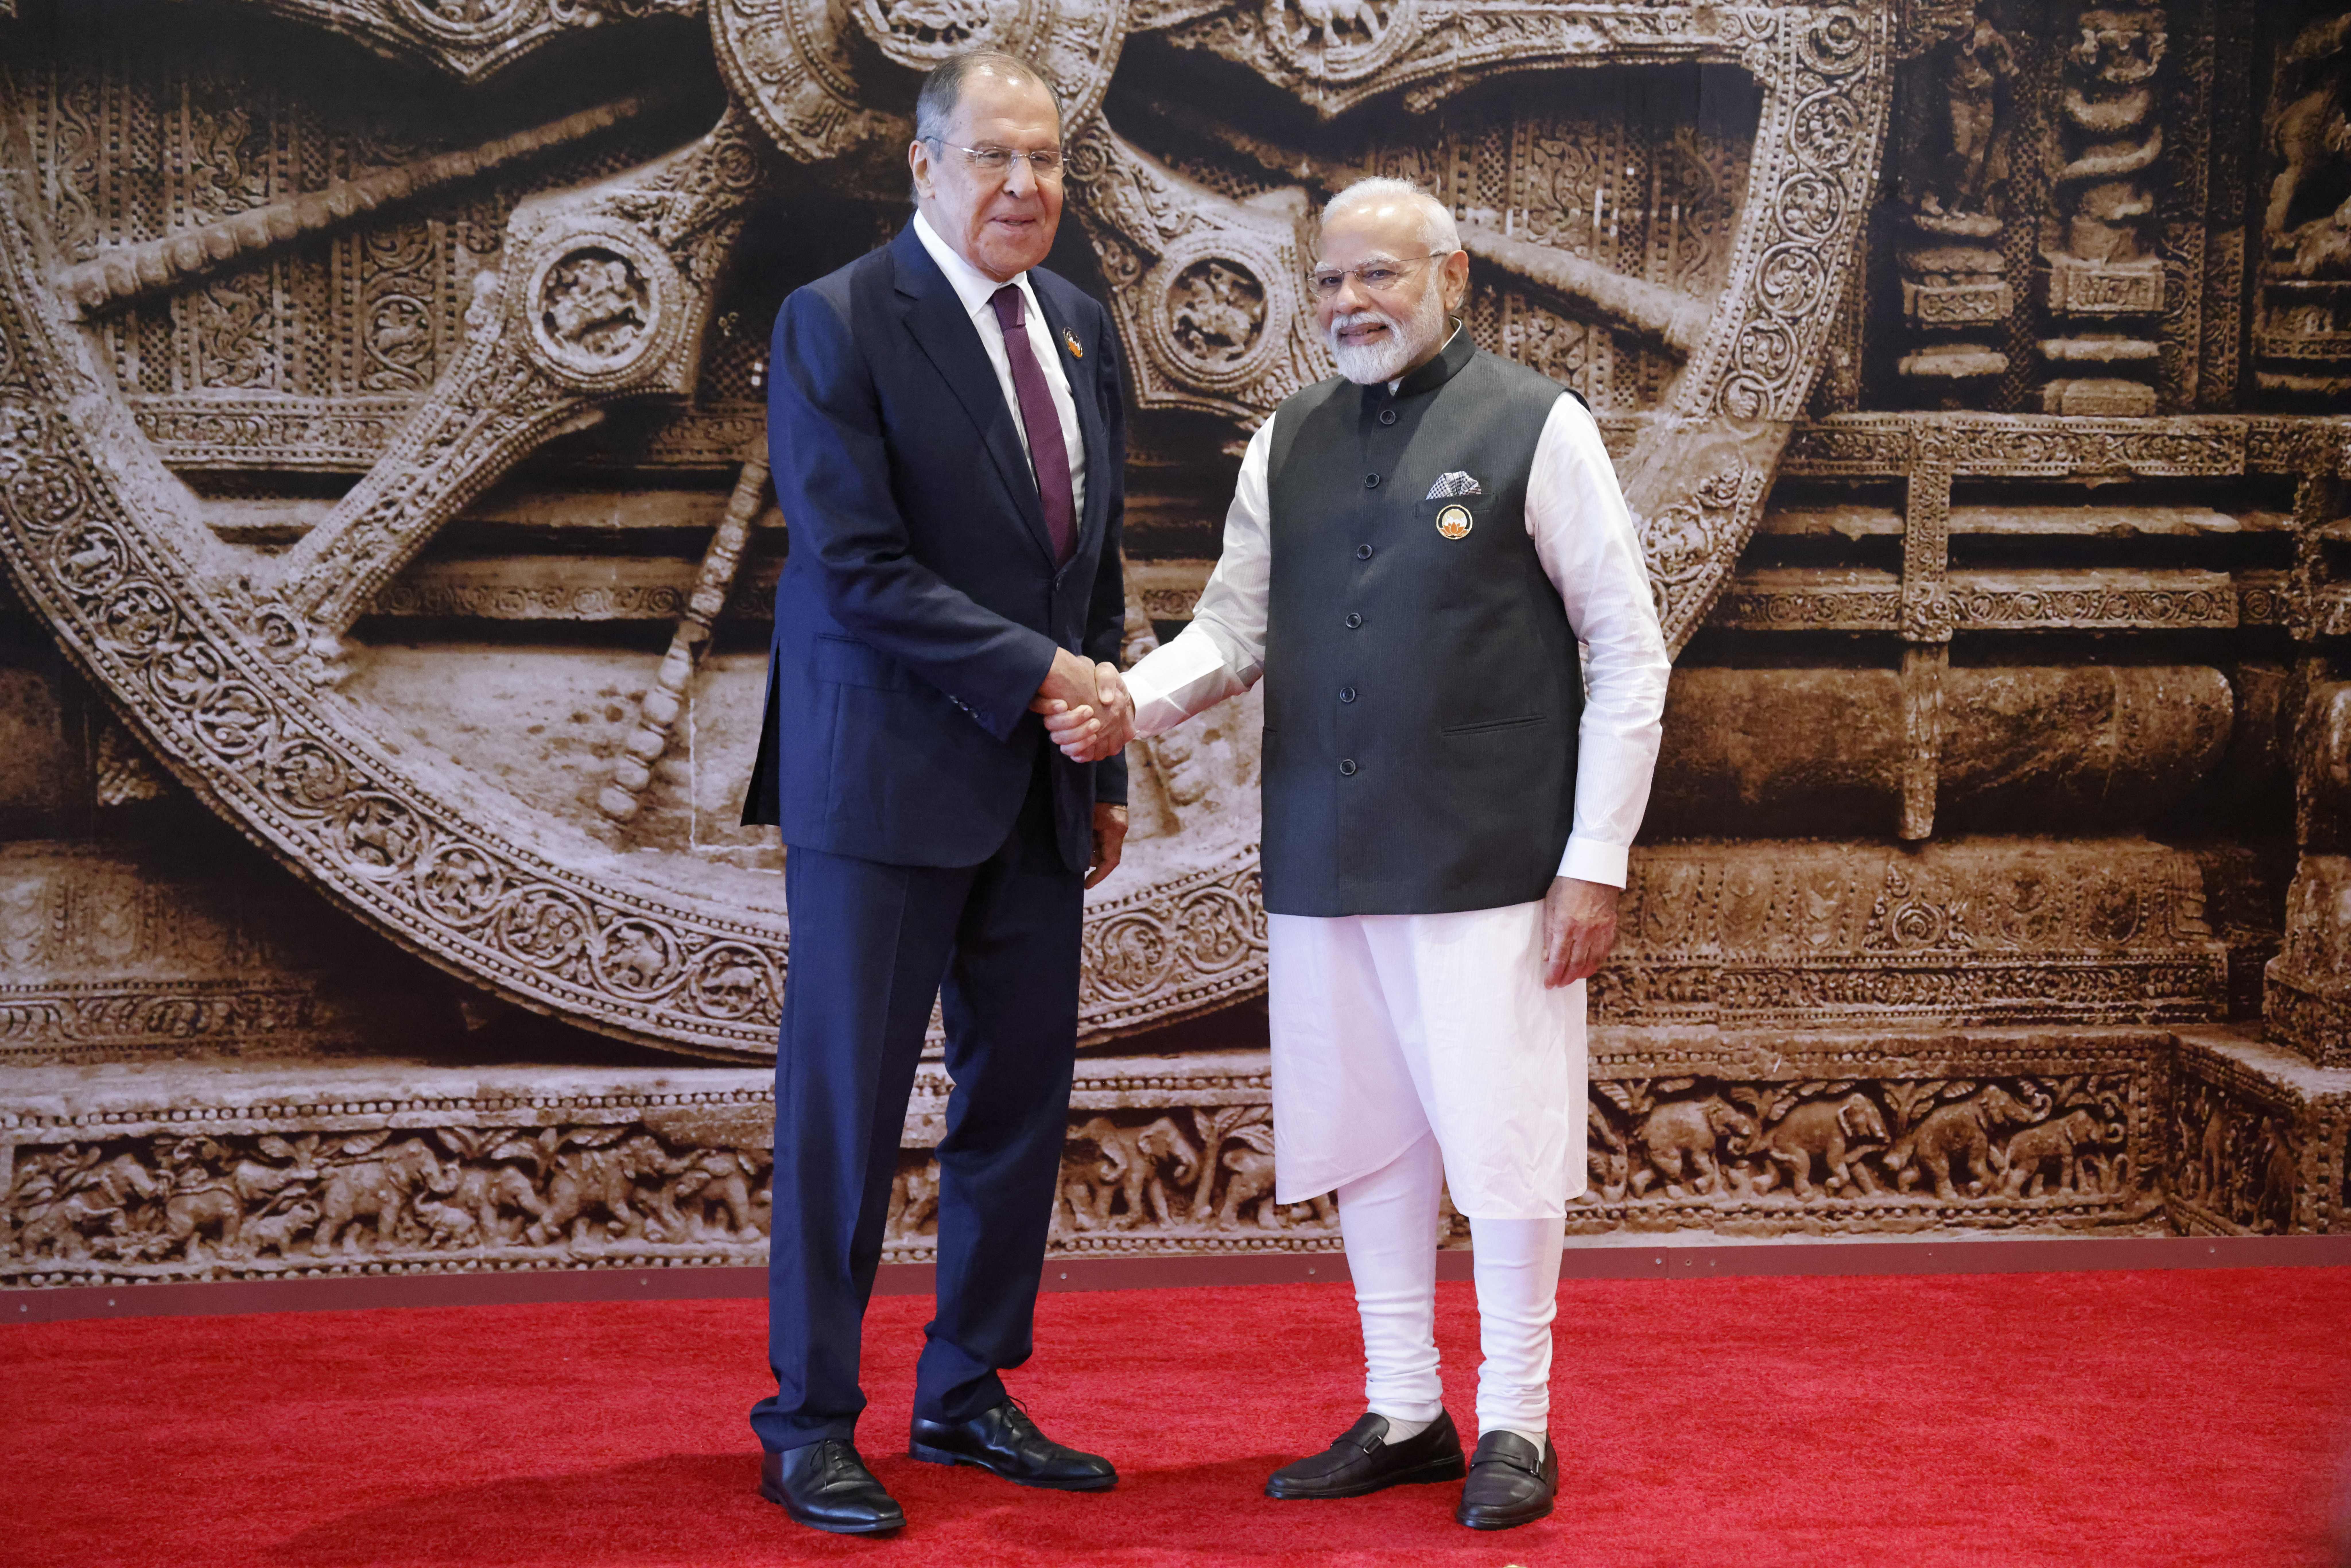 India's Prime Minister Narendra Modi (R) shakes hand with Russian Foreign Minister Sergei Lavrov